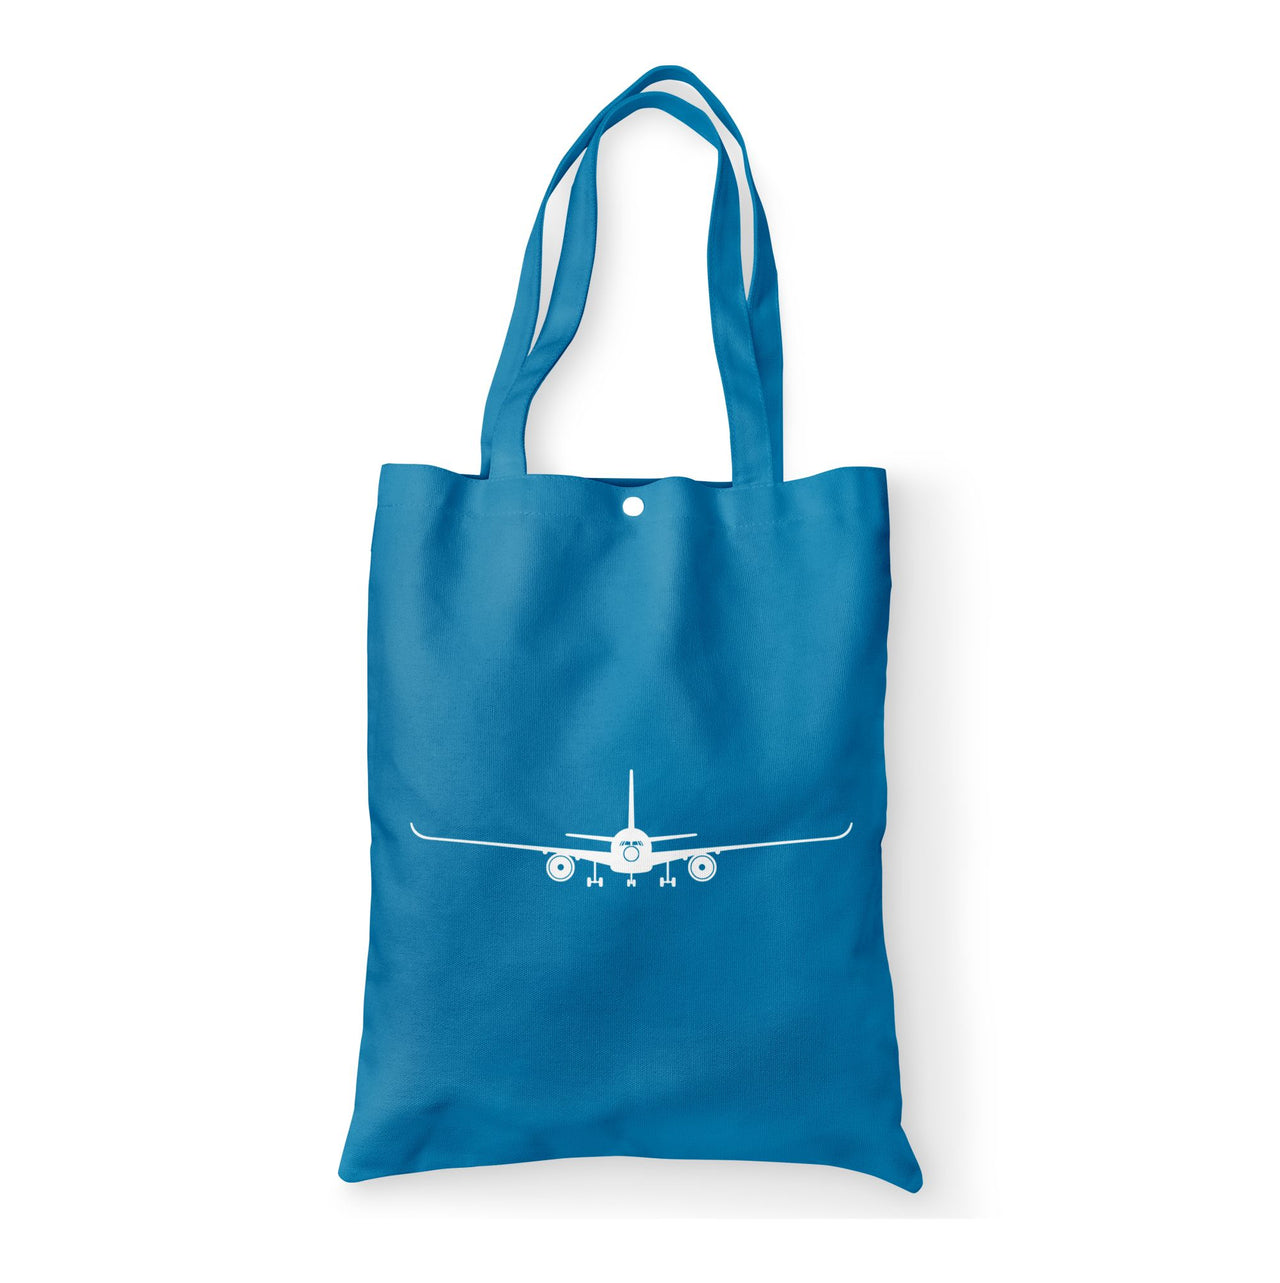 Airbus A350 Silhouette Designed Tote Bags